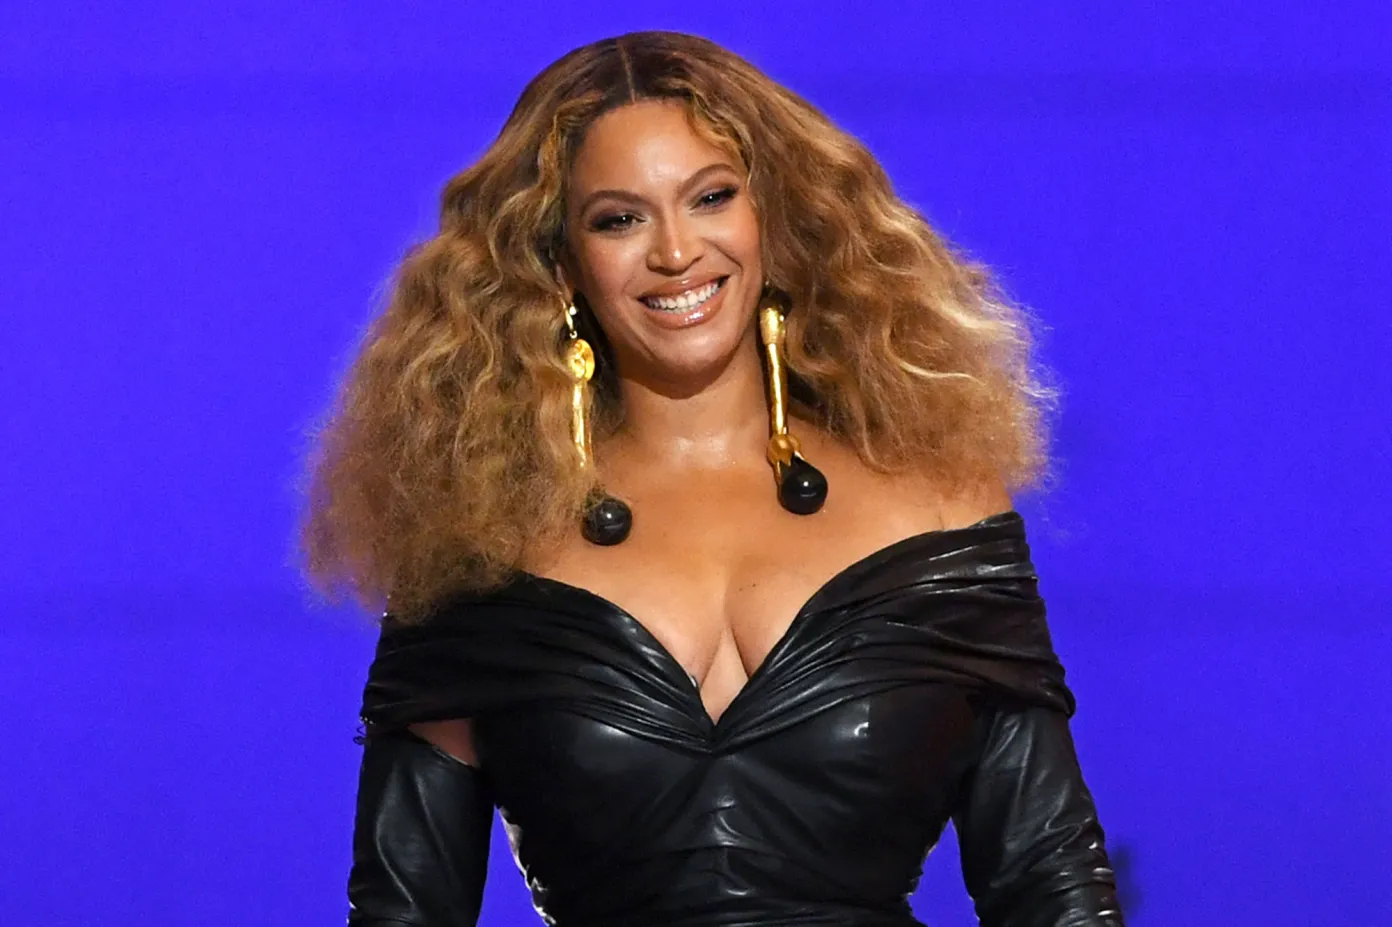 Beyonce Biography, Wiki, Net Worth, Spouse, Family Background, Photos, Music, And More